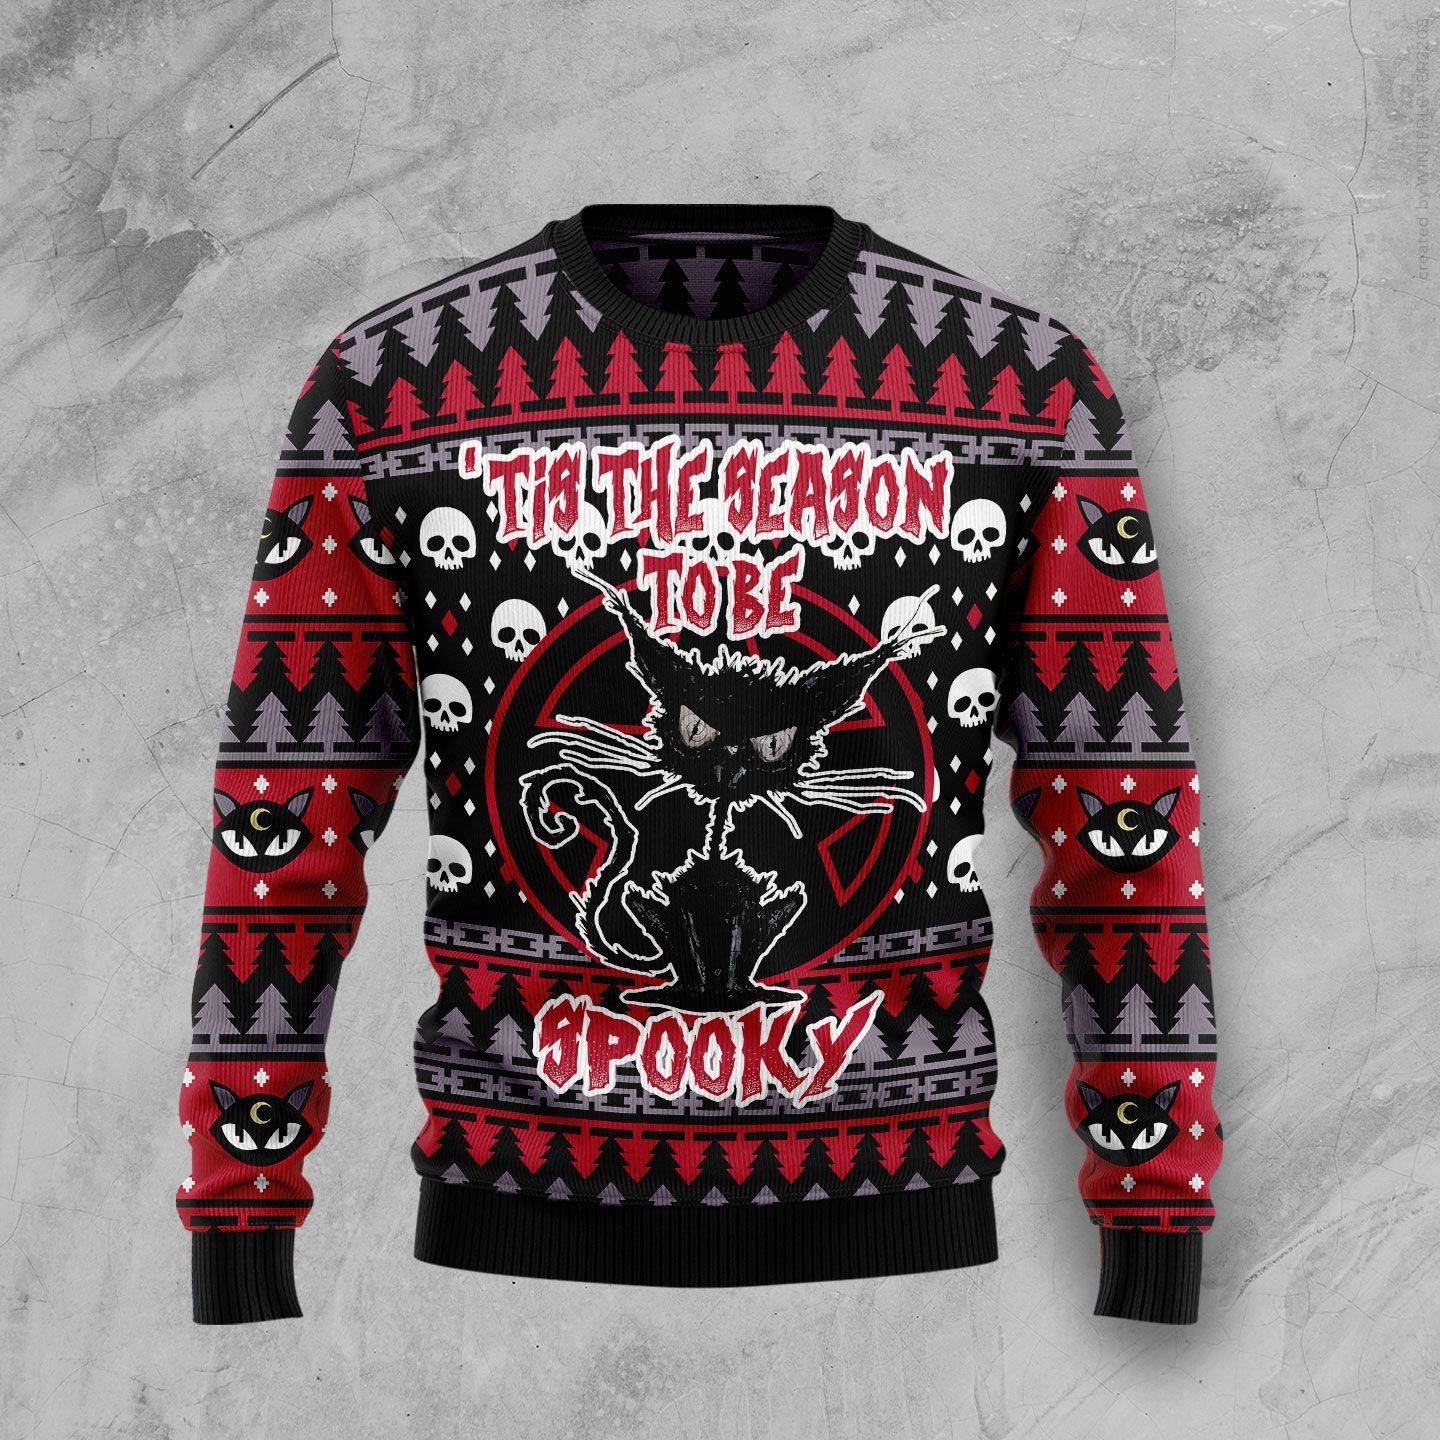 Black Cat Spooky Halloween Ugly Christmas Sweater Ugly Sweater For Men Women